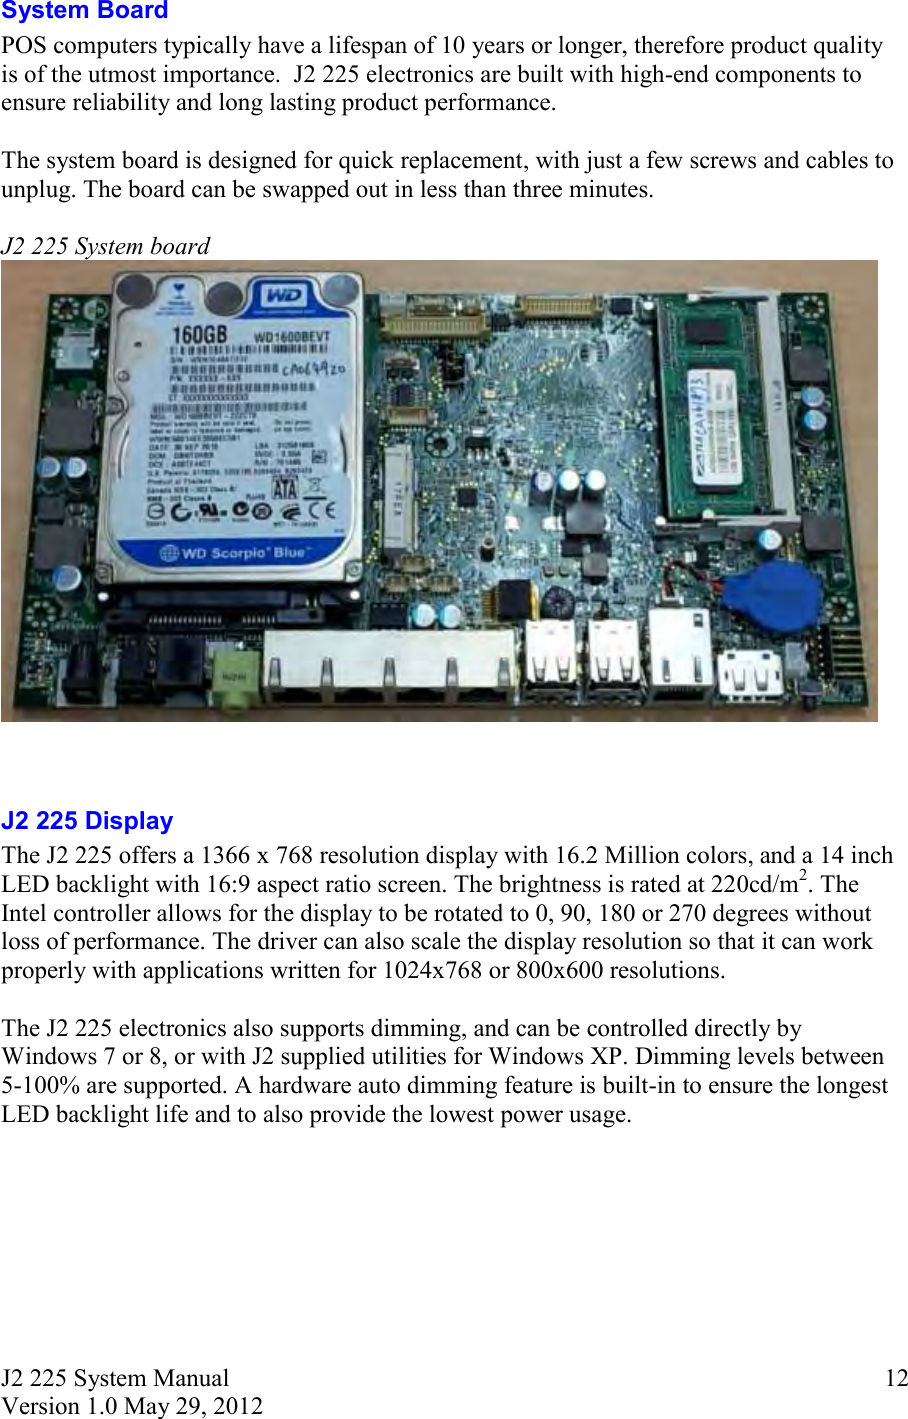 J2 225 System Manual Version 1.0 May 29, 2012      12System Board POS computers typically have a lifespan of 10 years or longer, therefore product quality is of the utmost importance.  J2 225 electronics are built with high-end components to ensure reliability and long lasting product performance.  The system board is designed for quick replacement, with just a few screws and cables to unplug. The board can be swapped out in less than three minutes.  J2 225 System board    J2 225 Display The J2 225 offers a 1366 x 768 resolution display with 16.2 Million colors, and a 14 inch LED backlight with 16:9 aspect ratio screen. The brightness is rated at 220cd/m2. The Intel controller allows for the display to be rotated to 0, 90, 180 or 270 degrees without loss of performance. The driver can also scale the display resolution so that it can work properly with applications written for 1024x768 or 800x600 resolutions.   The J2 225 electronics also supports dimming, and can be controlled directly by Windows 7 or 8, or with J2 supplied utilities for Windows XP. Dimming levels between 5-100% are supported. A hardware auto dimming feature is built-in to ensure the longest LED backlight life and to also provide the lowest power usage.    